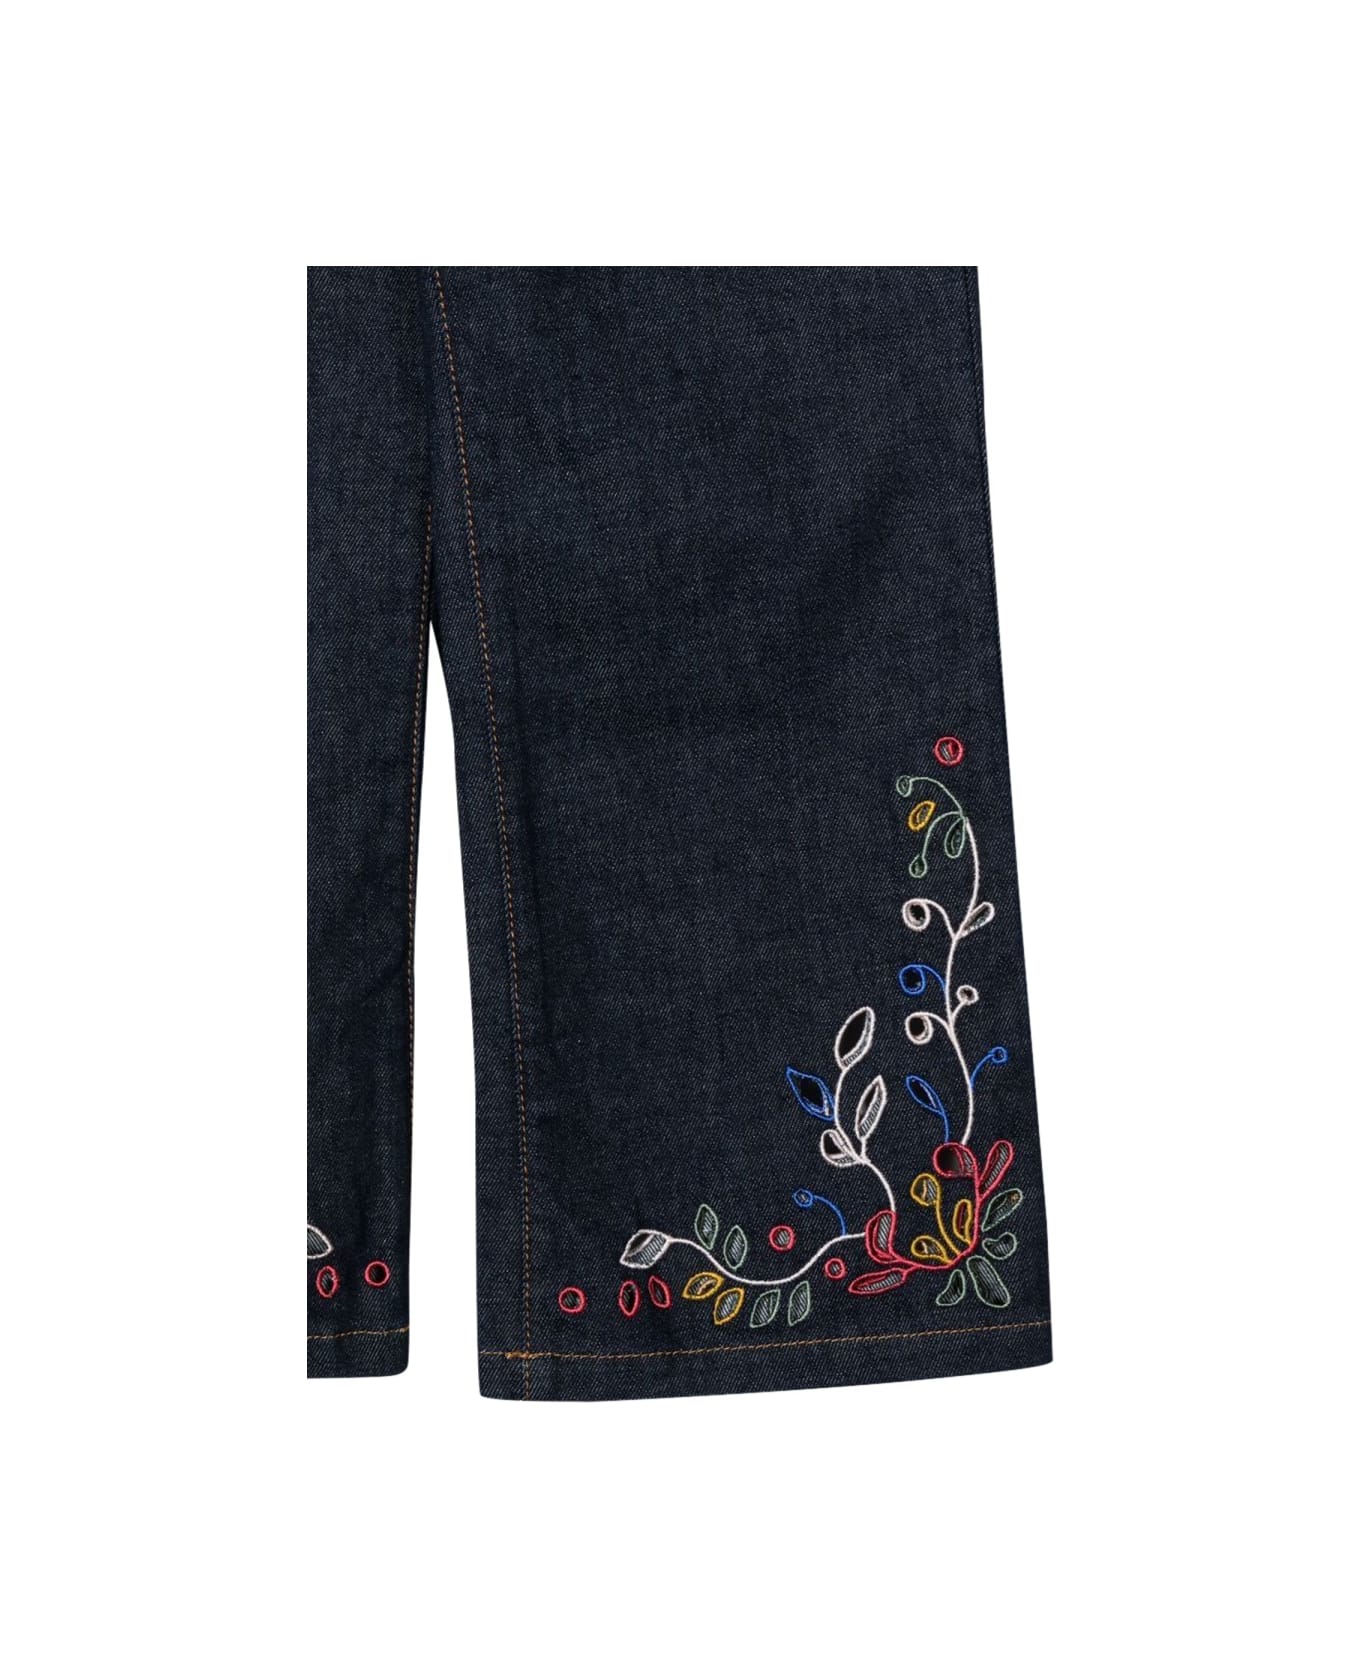 Chloé Wide Bottom Jeans With Embroidery - DENIM